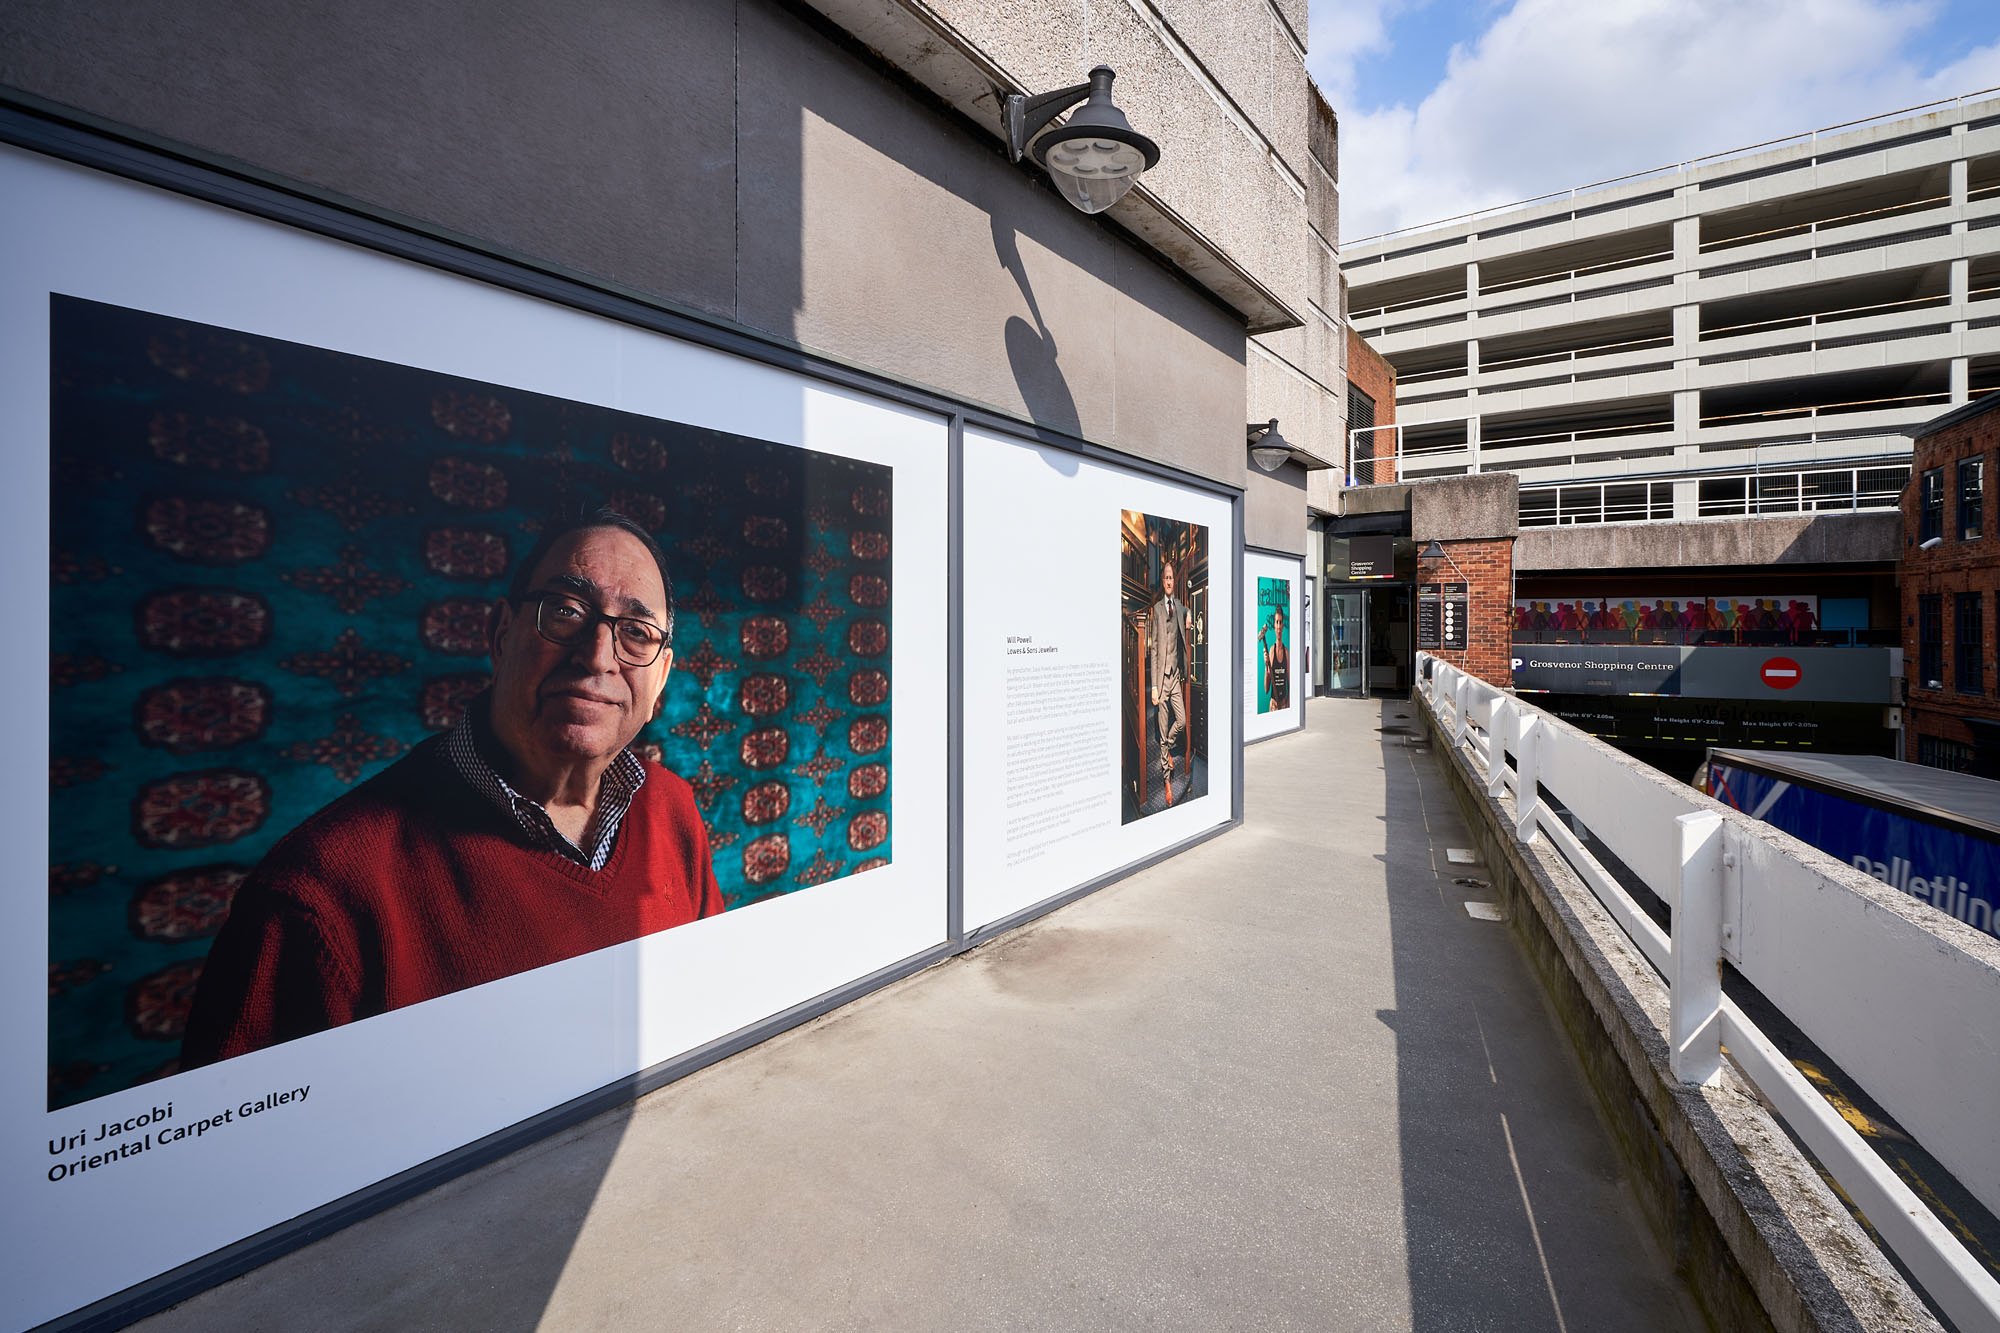 Portrait of a man printed on an external window of Grosvenor Shopping Centre in Chester. The windows and images displayed are on a balcony looking down onto the street below.